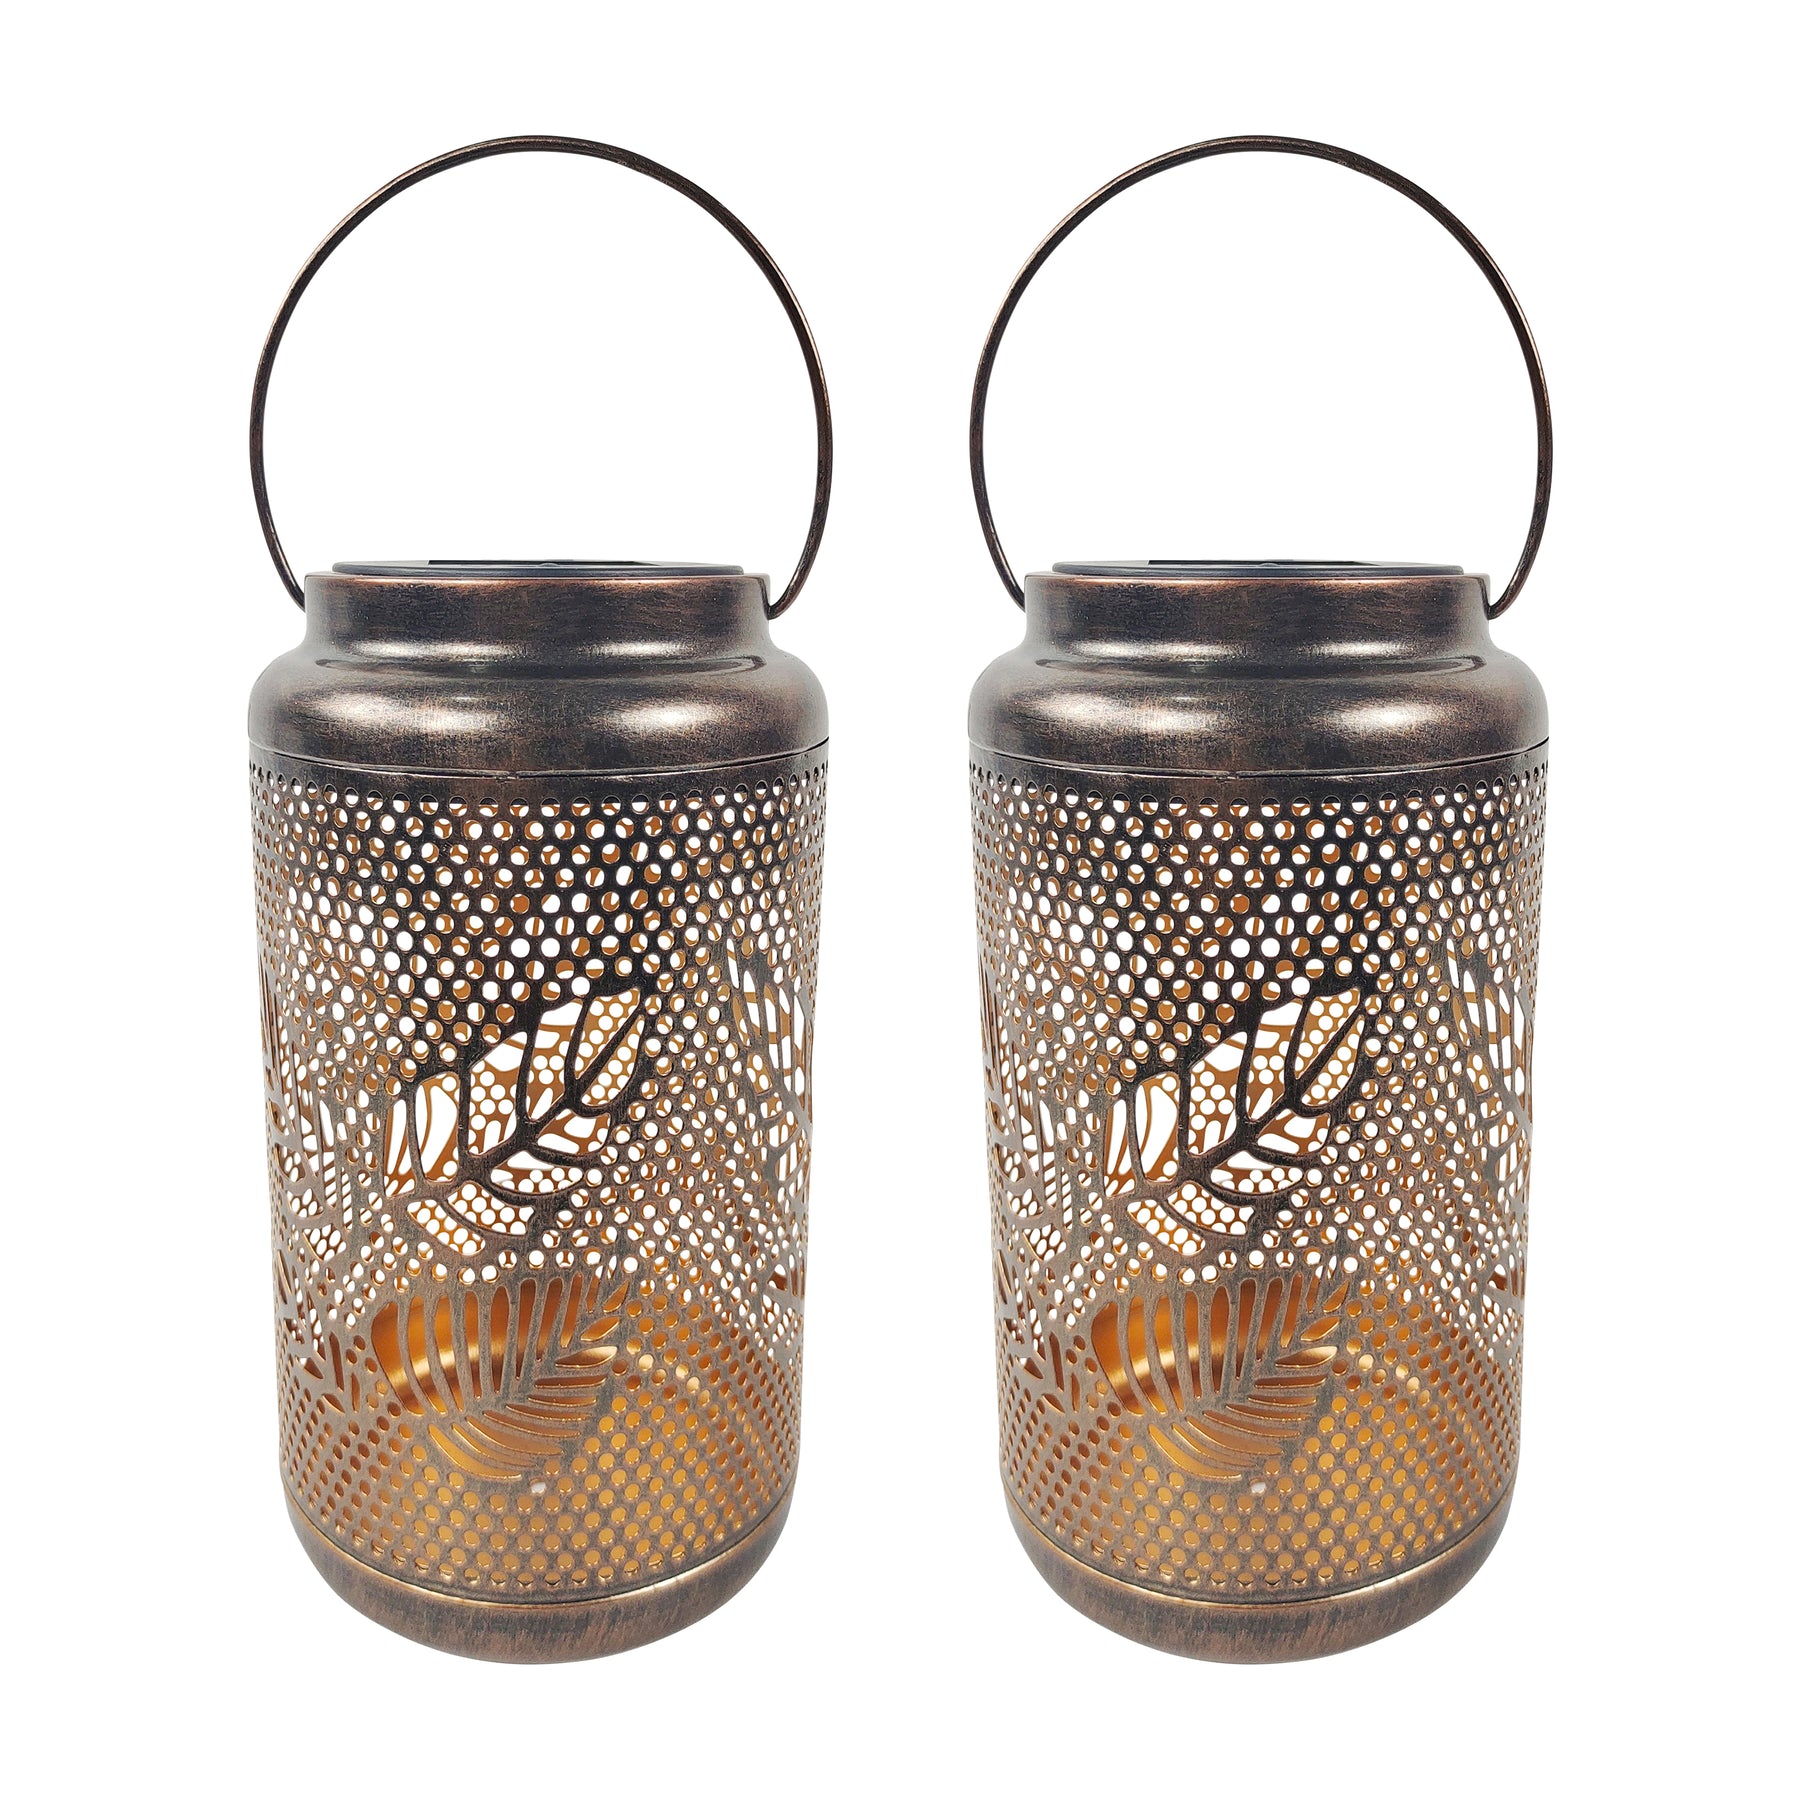 Bliss Outdoors 9-inch Tall 2-Pack Hanging and Tabletop Decorative Solar LED Lantern with Unique Berry Leaf Design and Antique Hand Painted Finish in the Brushed Bronze Variation.